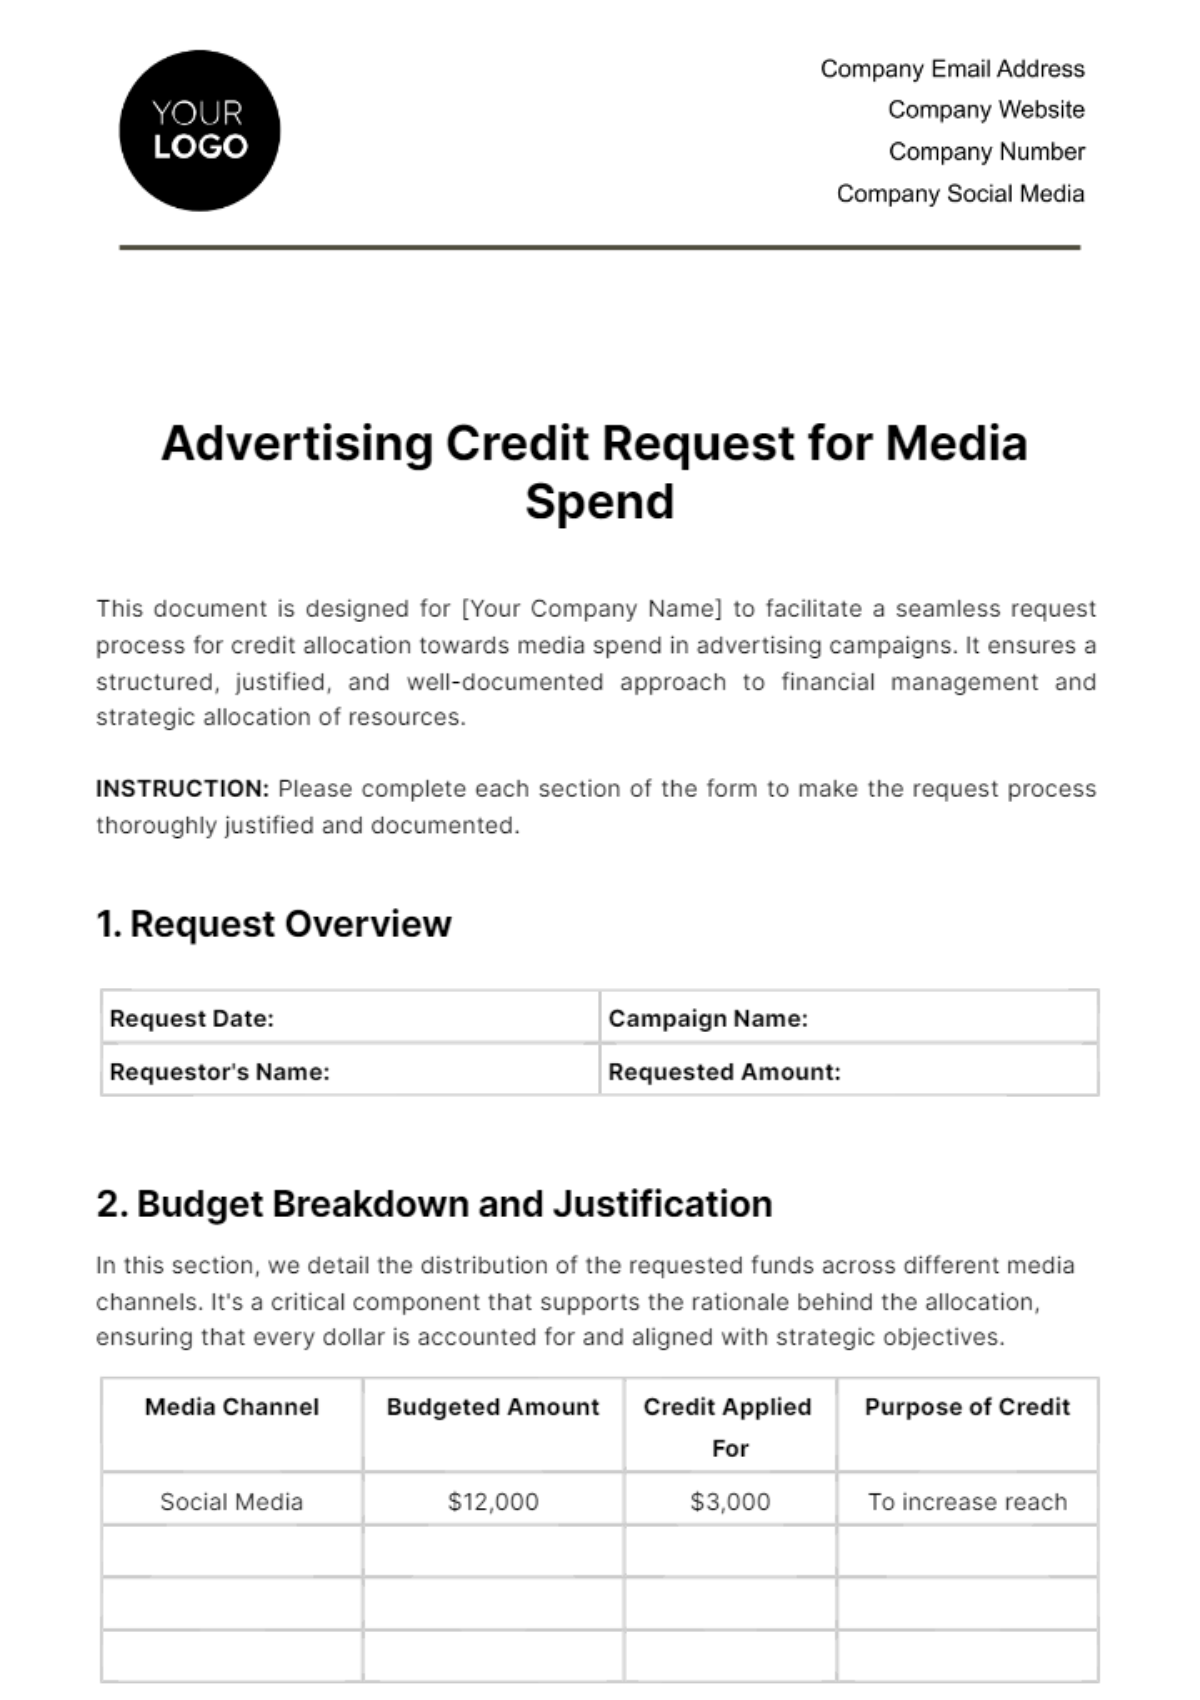 Free Advertising Credit Request for Media Spend Template